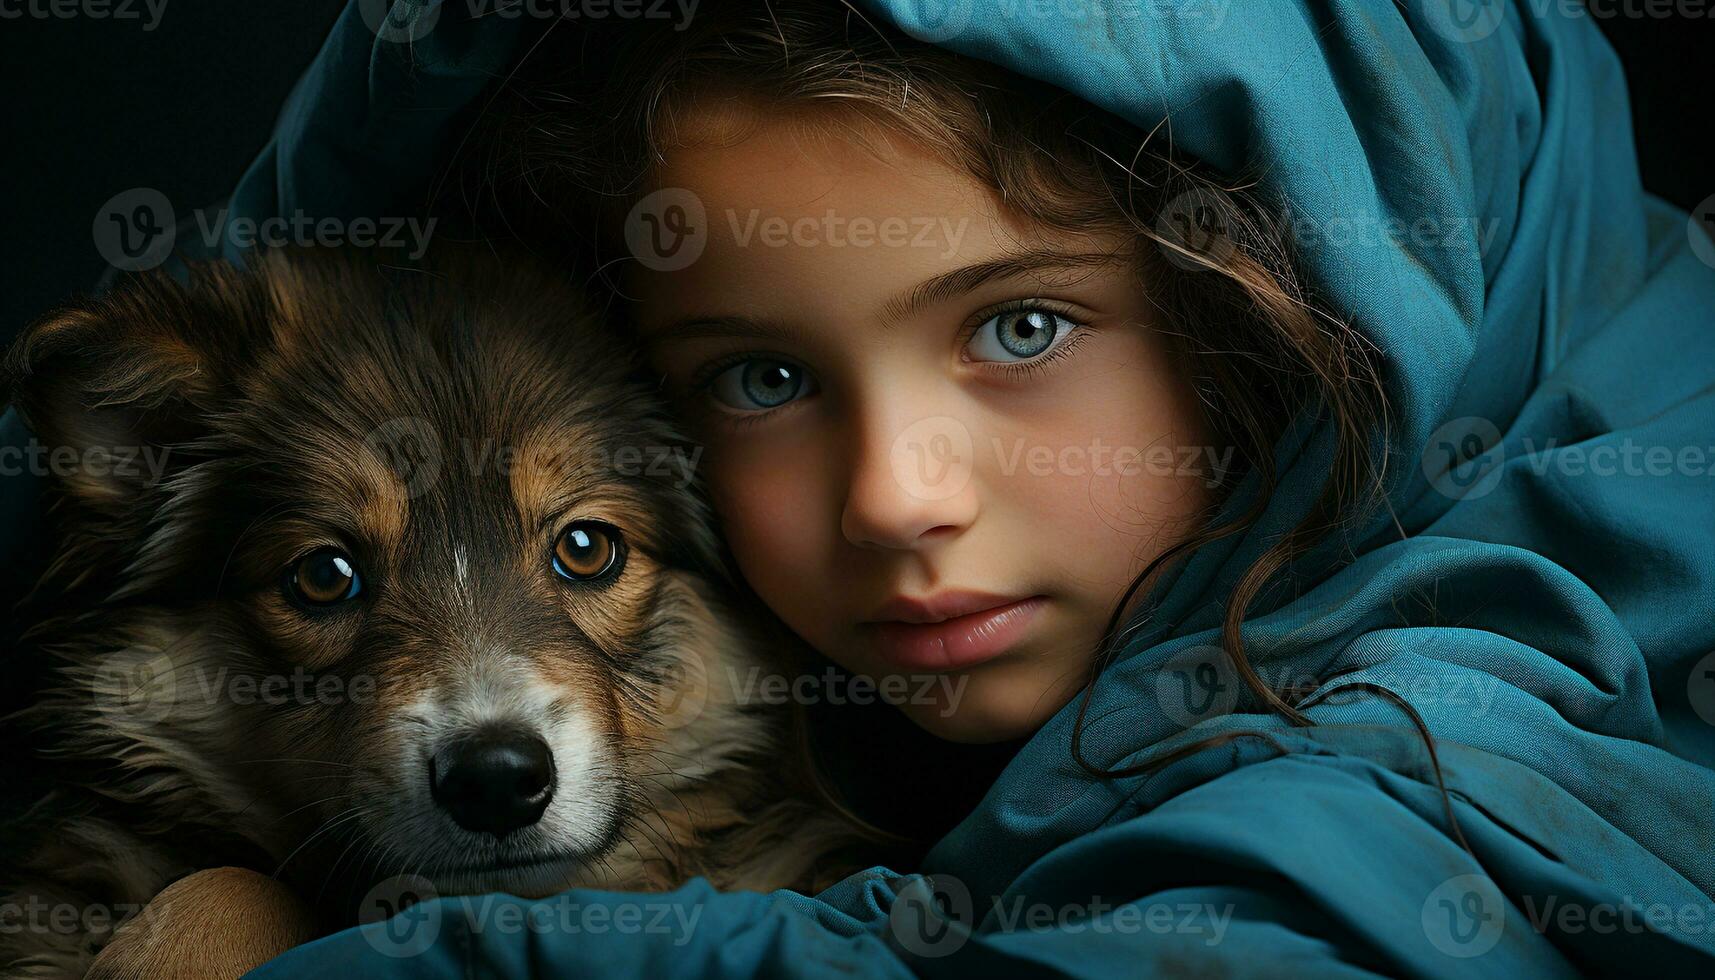 A cute puppy and a smiling girl, pure friendship and love generated by AI photo